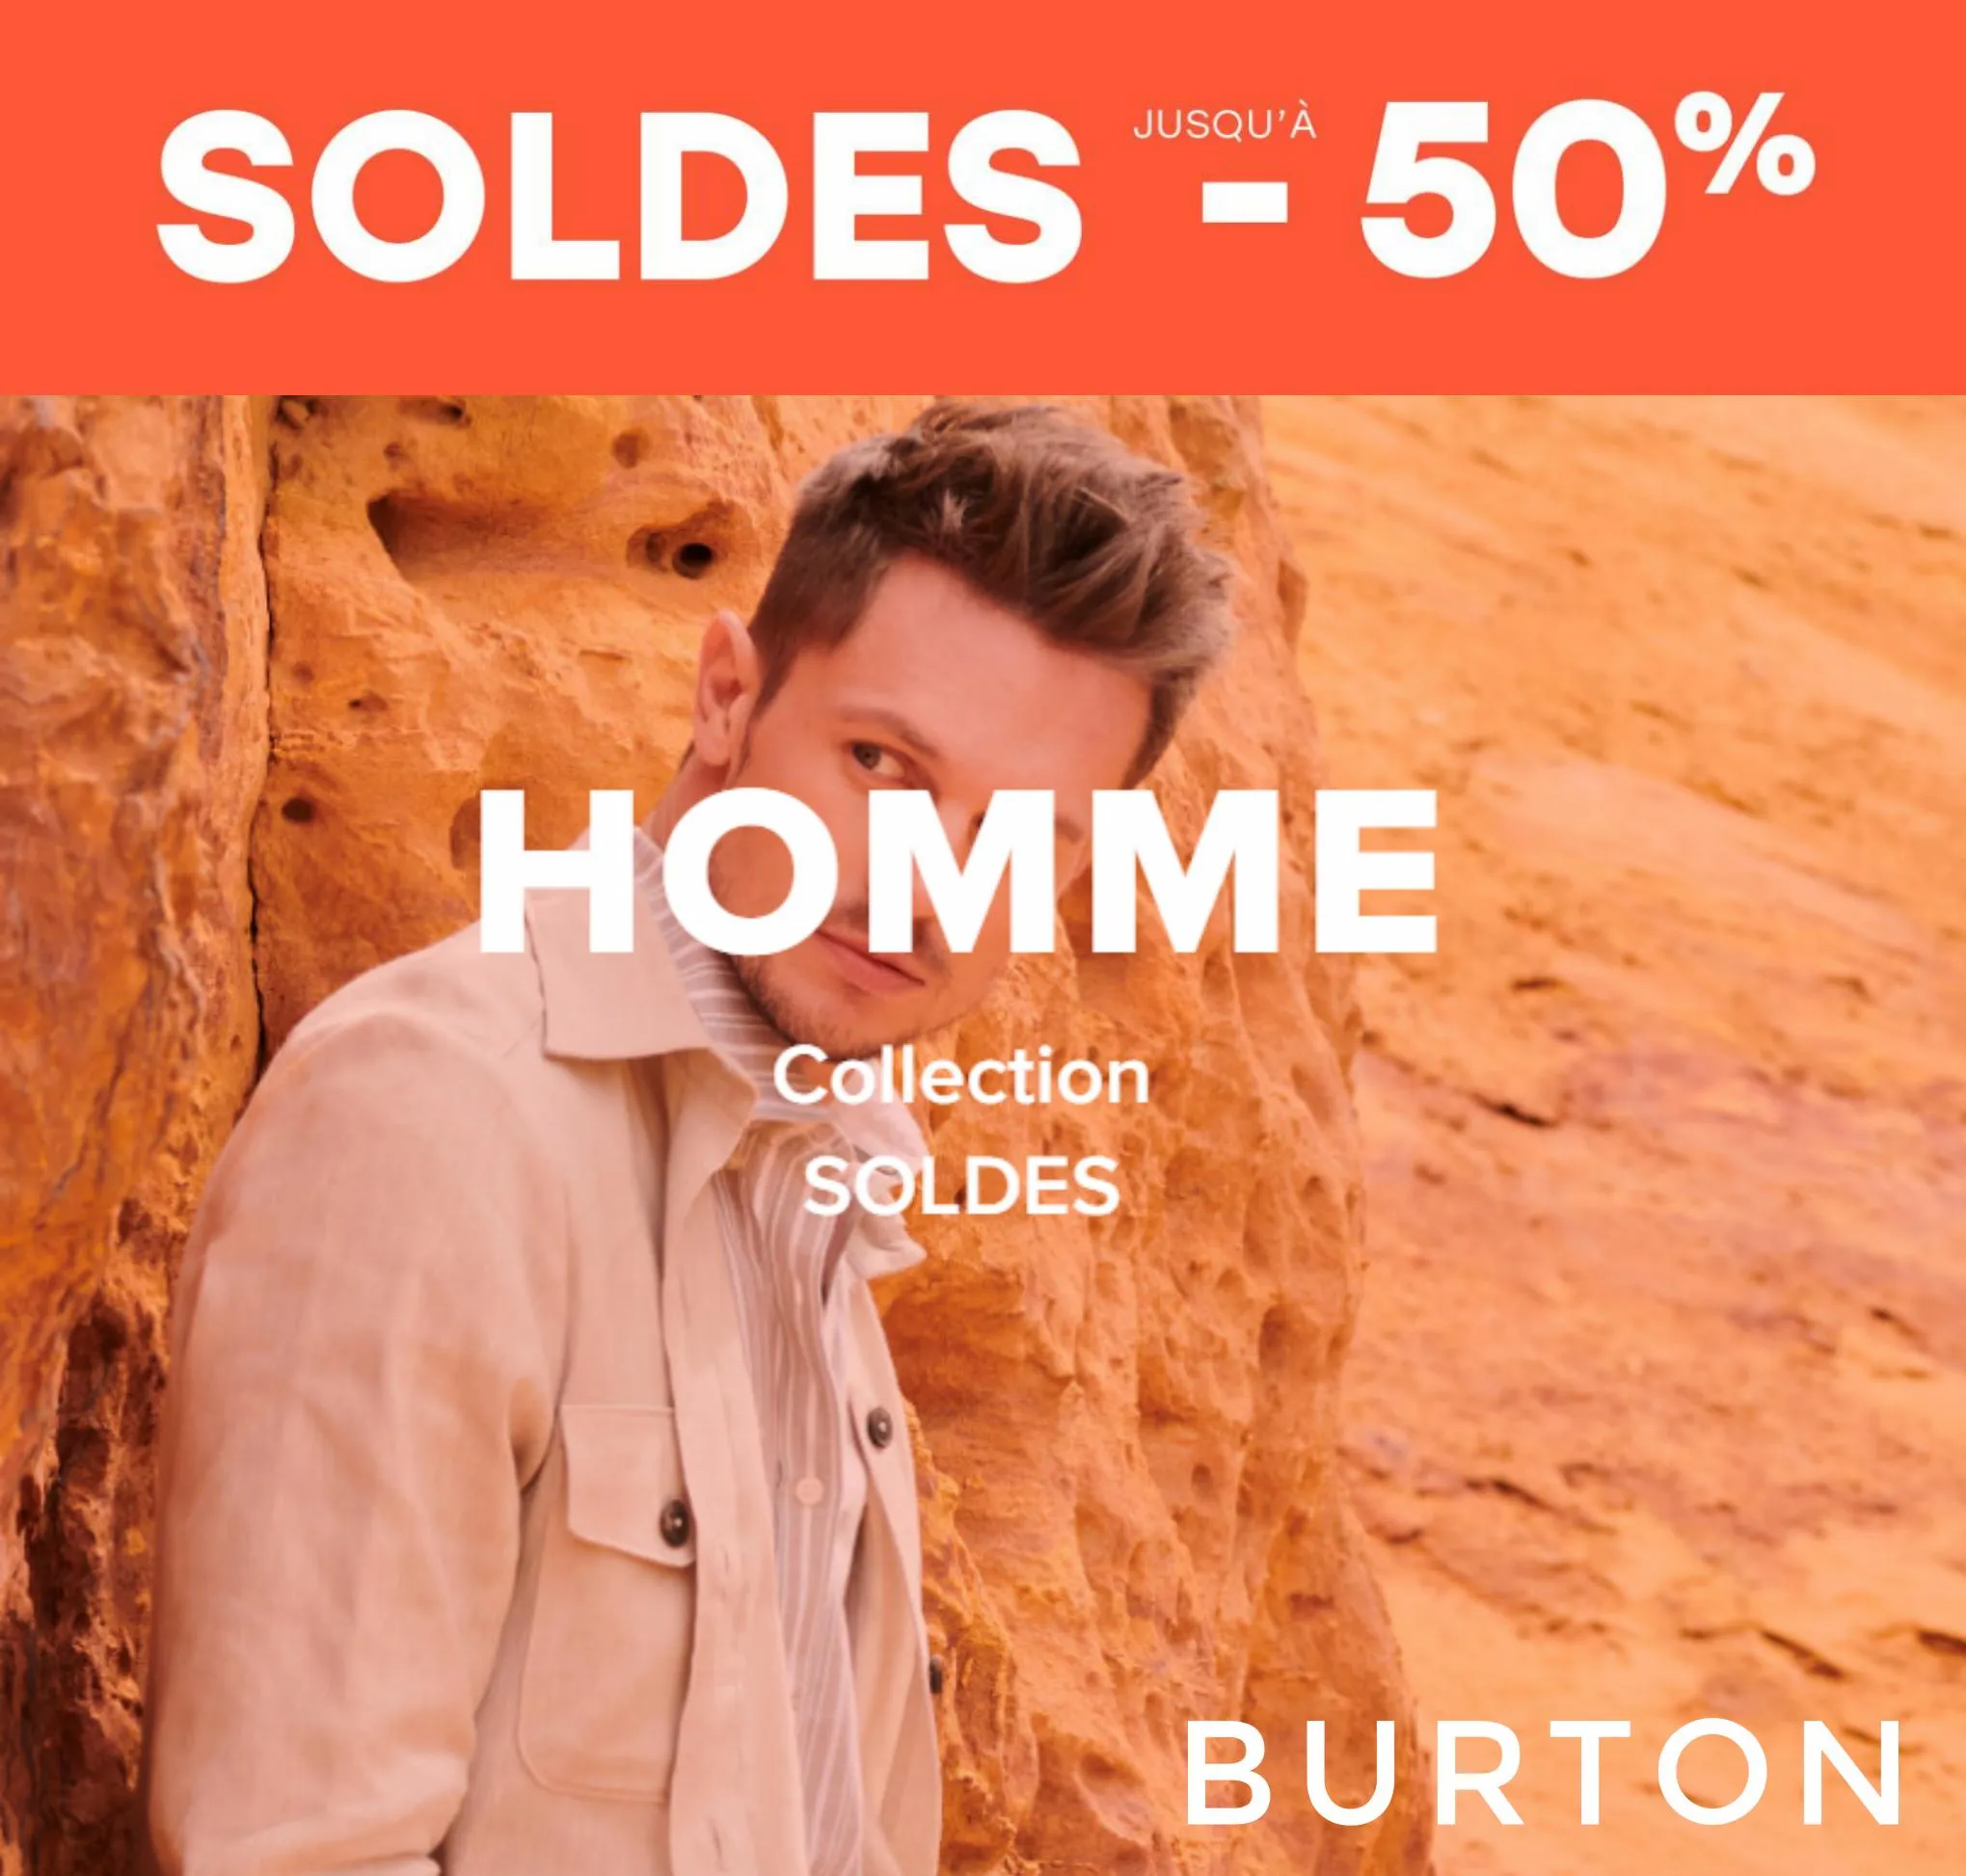 Catalogue Soldes -50% Homme, page 00001